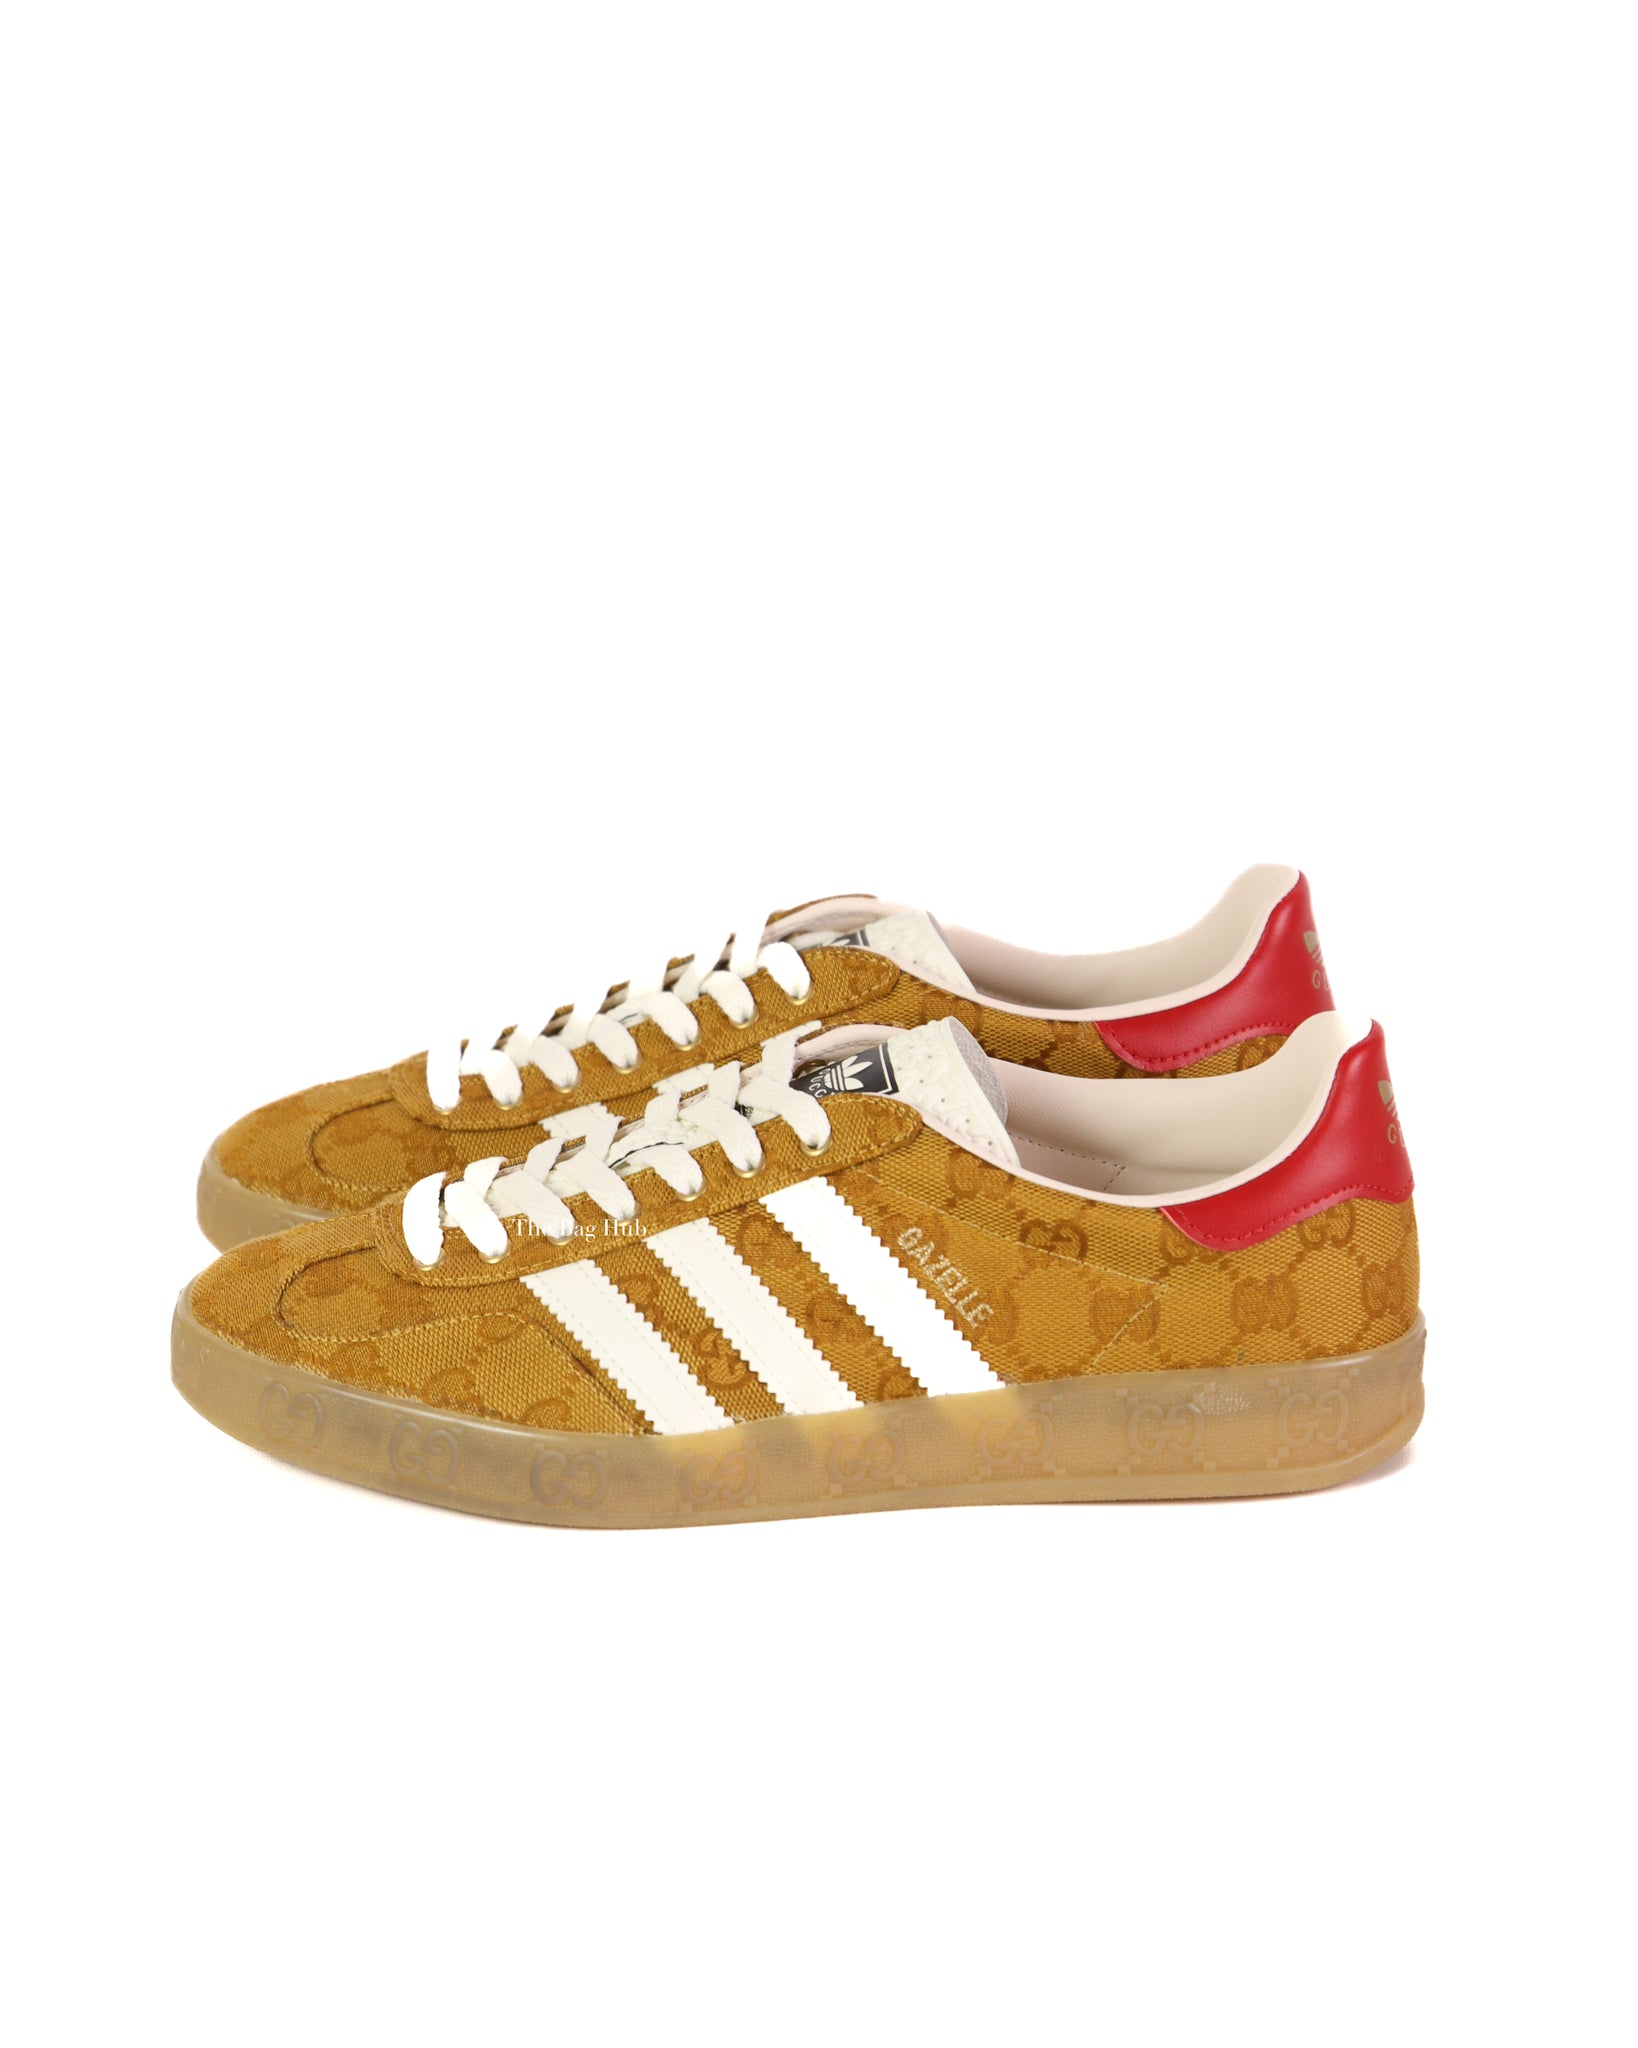 Adidas x Gucci Beige/Brown GG Canvas Gazelle Low Top Sneakers Size 44 Gucci